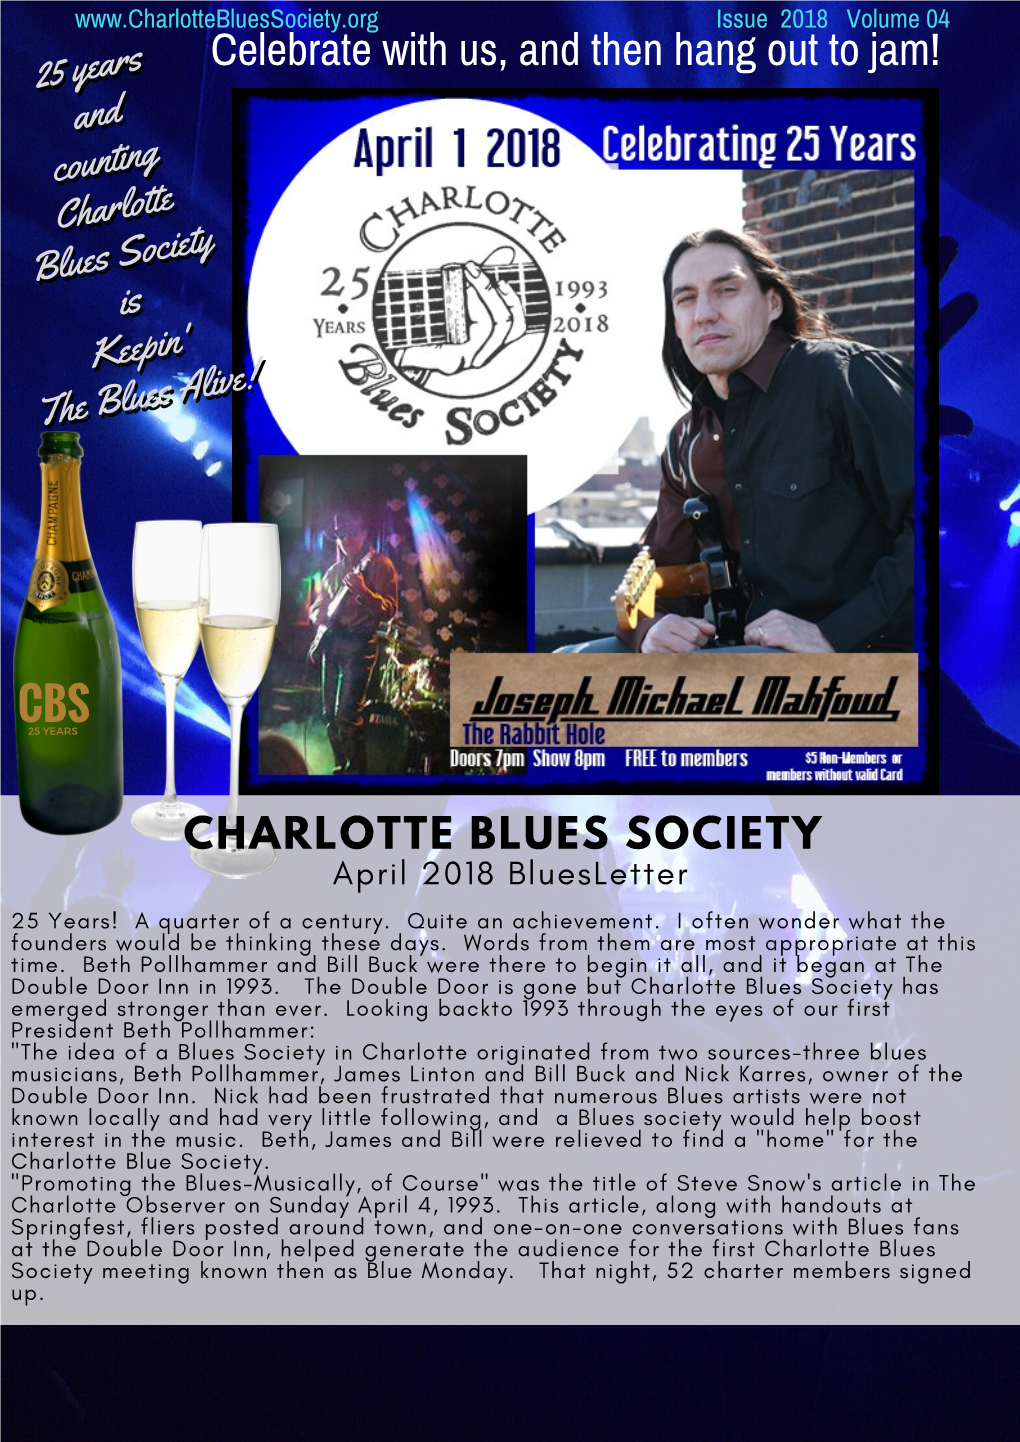 CHARLOTTE BLUES SOCIETY April 2018 Bluesletter 25 Years! a Quarter of a Century